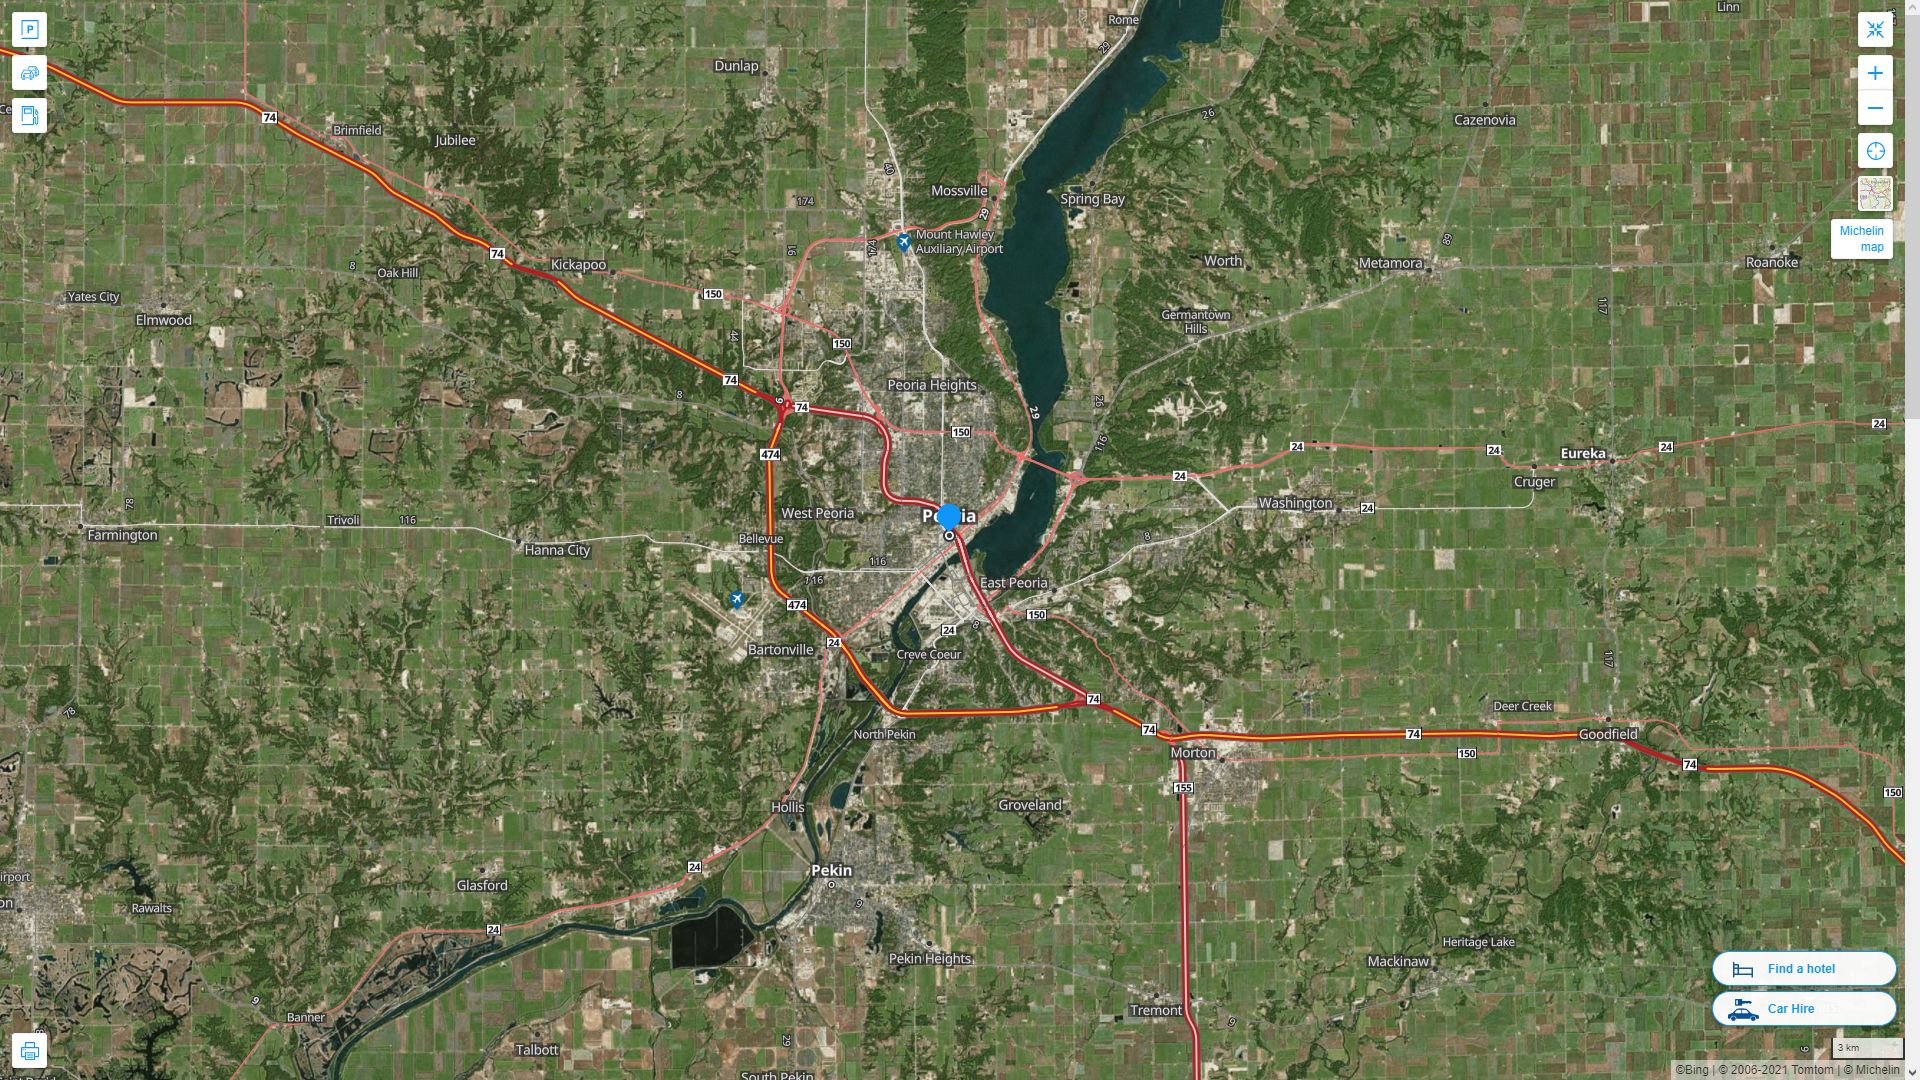 Peoria illinois Highway and Road Map with Satellite View